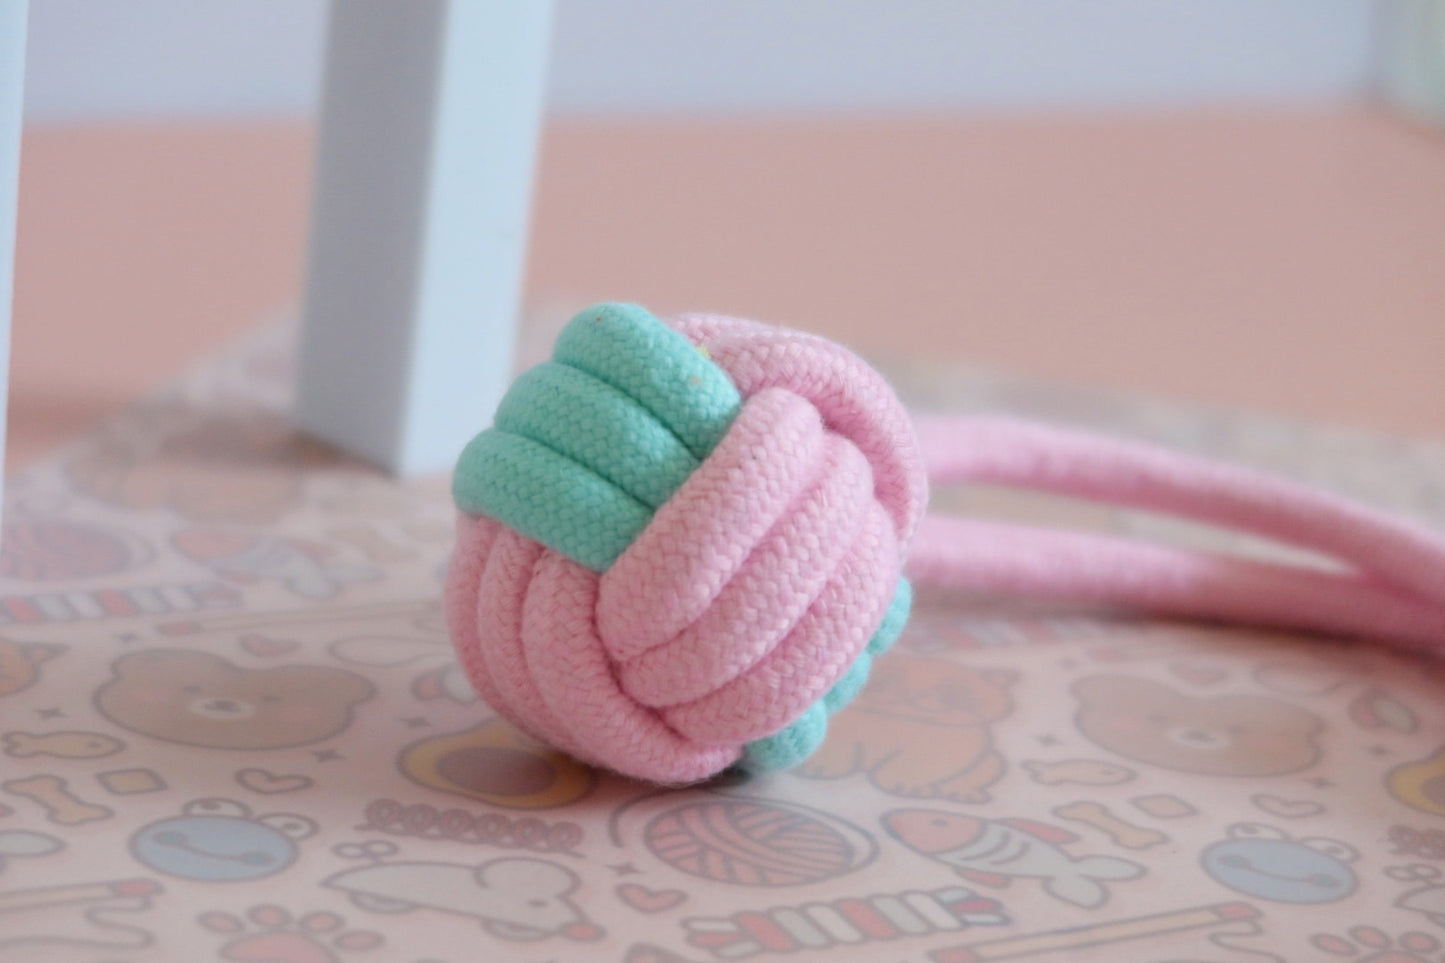 Pink & Mint Rope Dog Toys / Puppy Gift - Tug of war